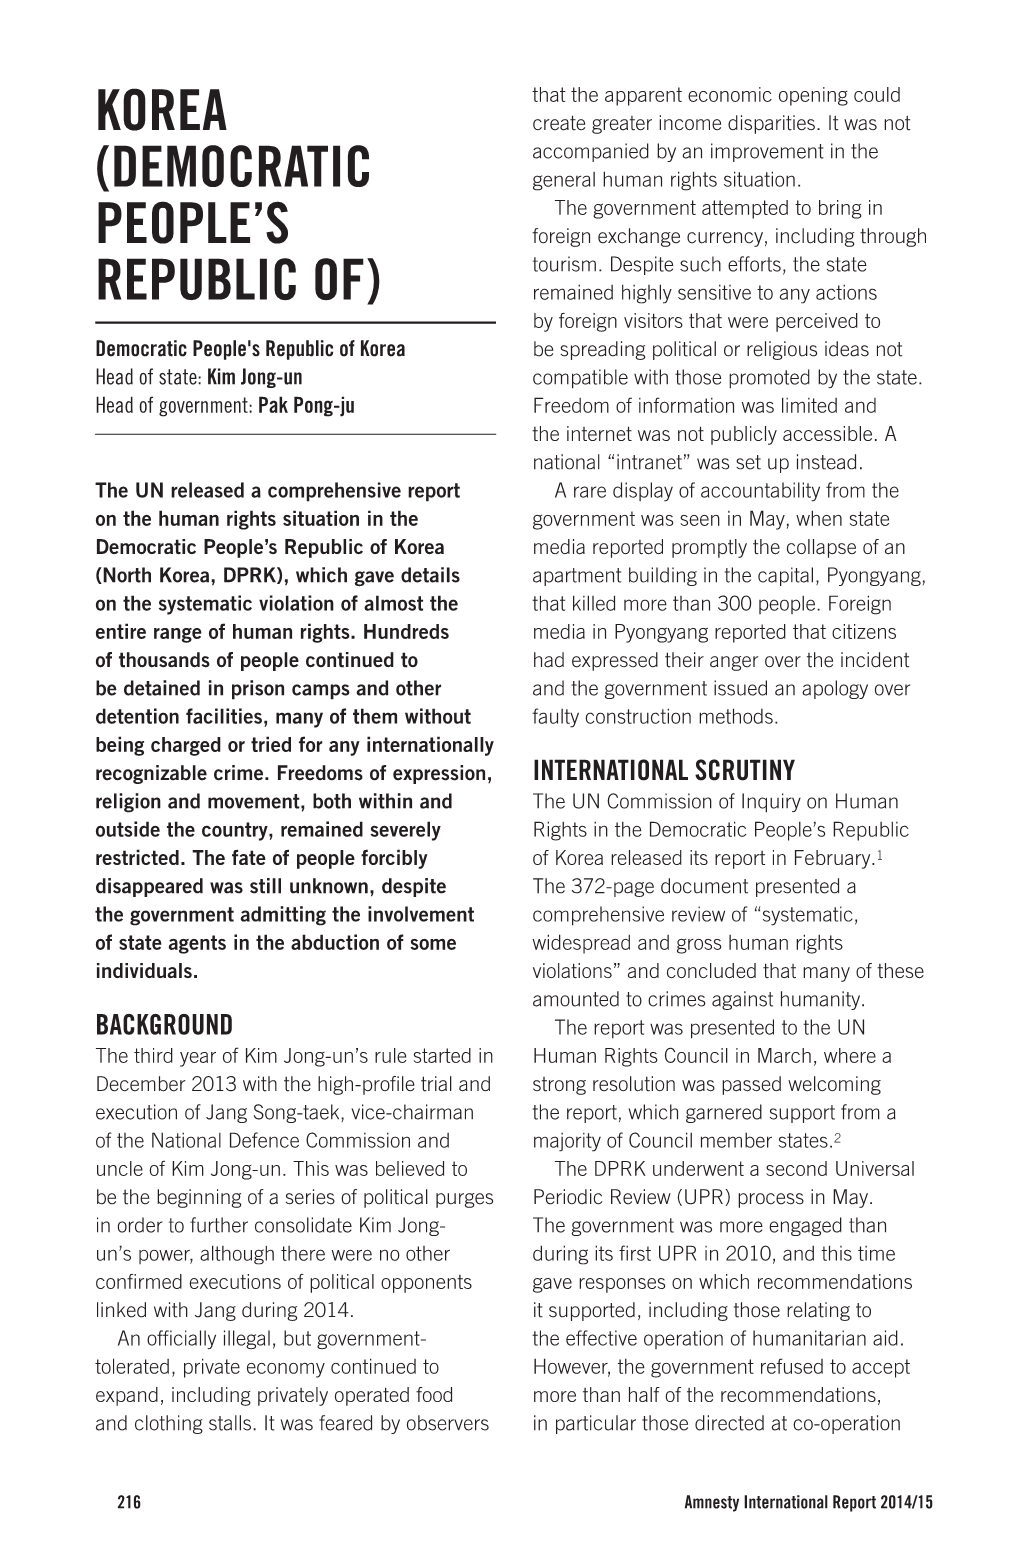 Amnesty International Report 2014/15 the State of the World's Human Rights